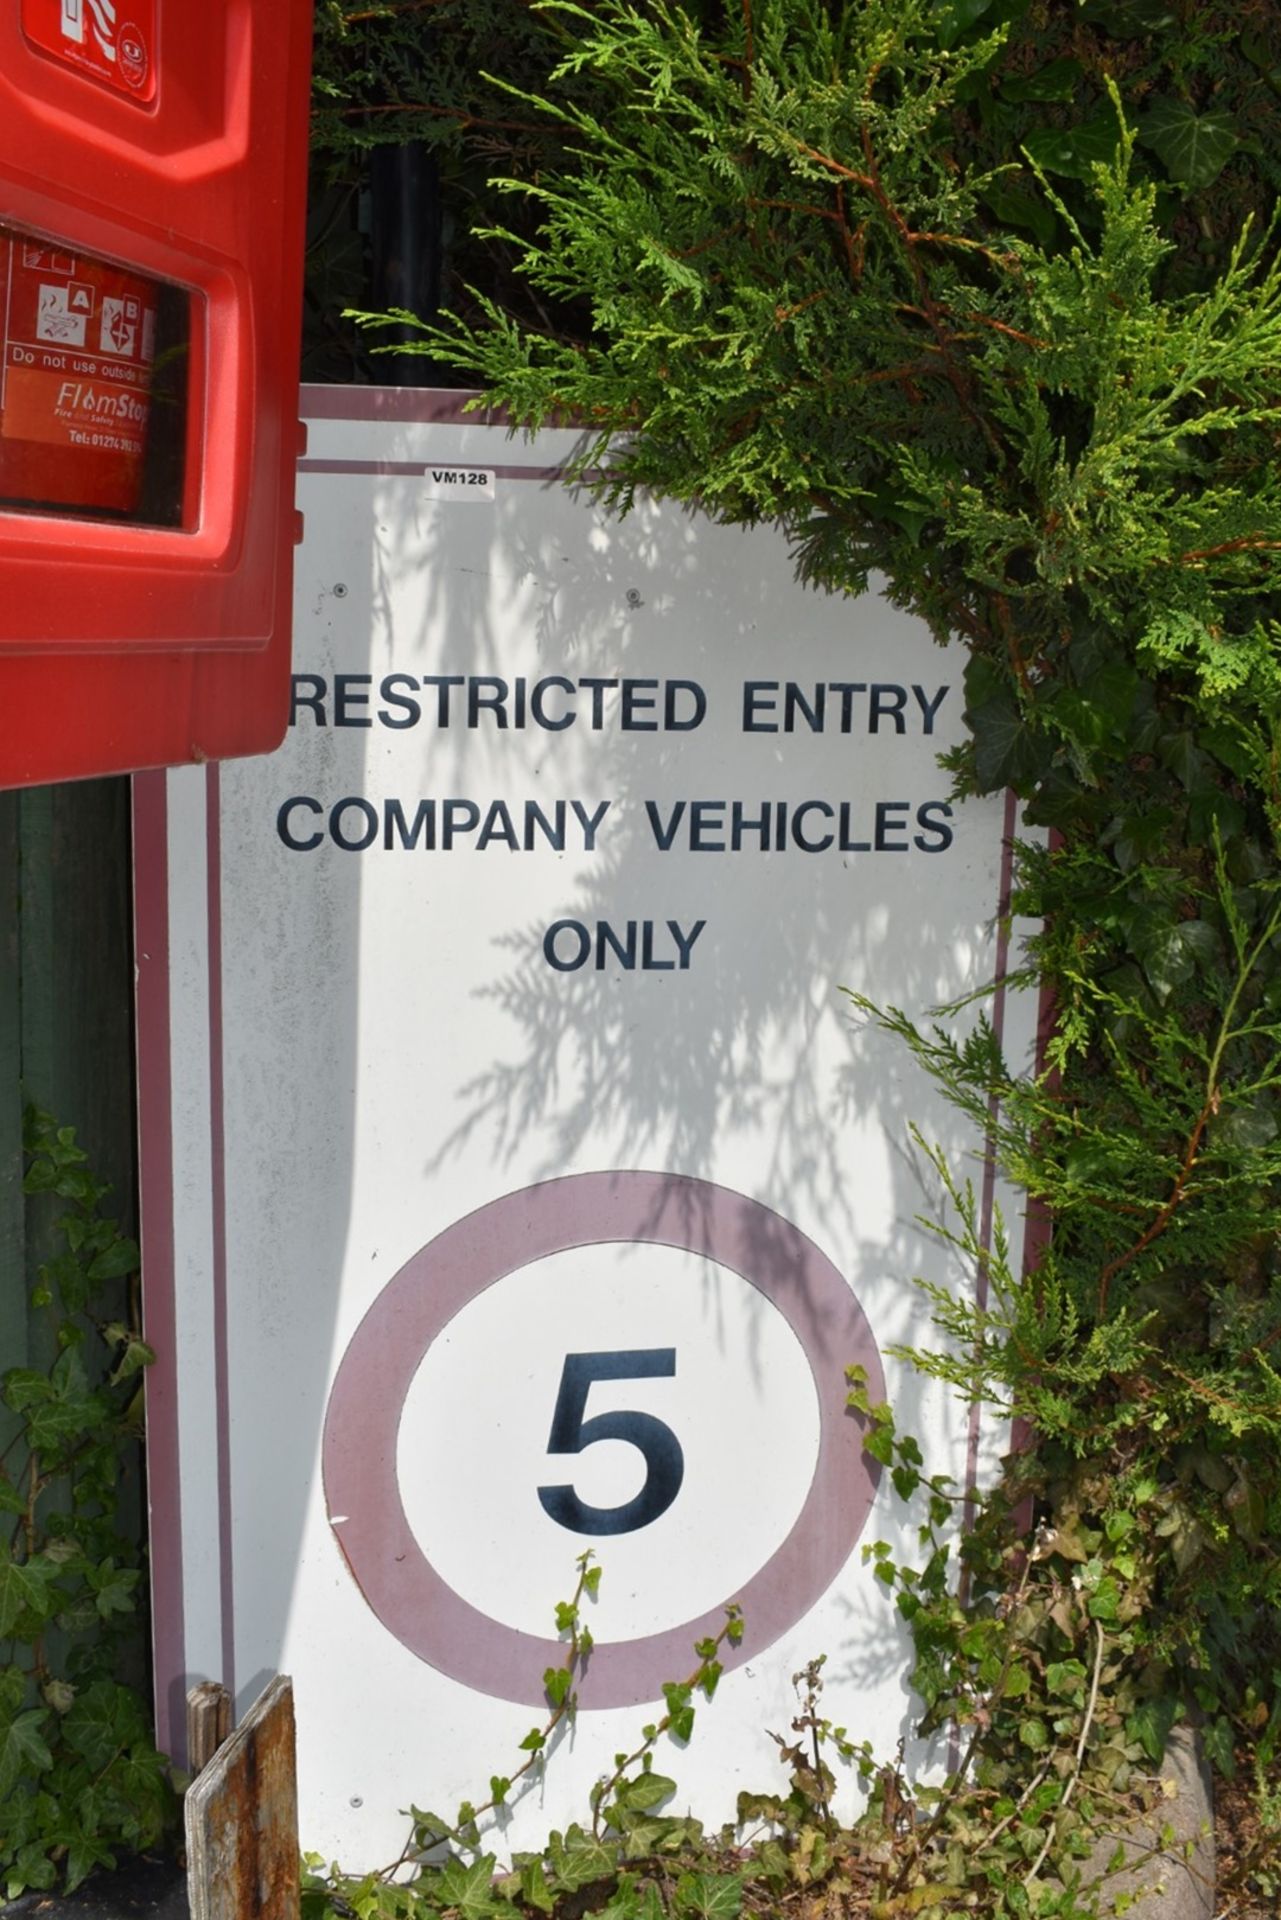 1 x Outdoor Metal Sign - Restricted Entry Company Vehicles Only 5mph Speed Limit - 70 x 120 cms -